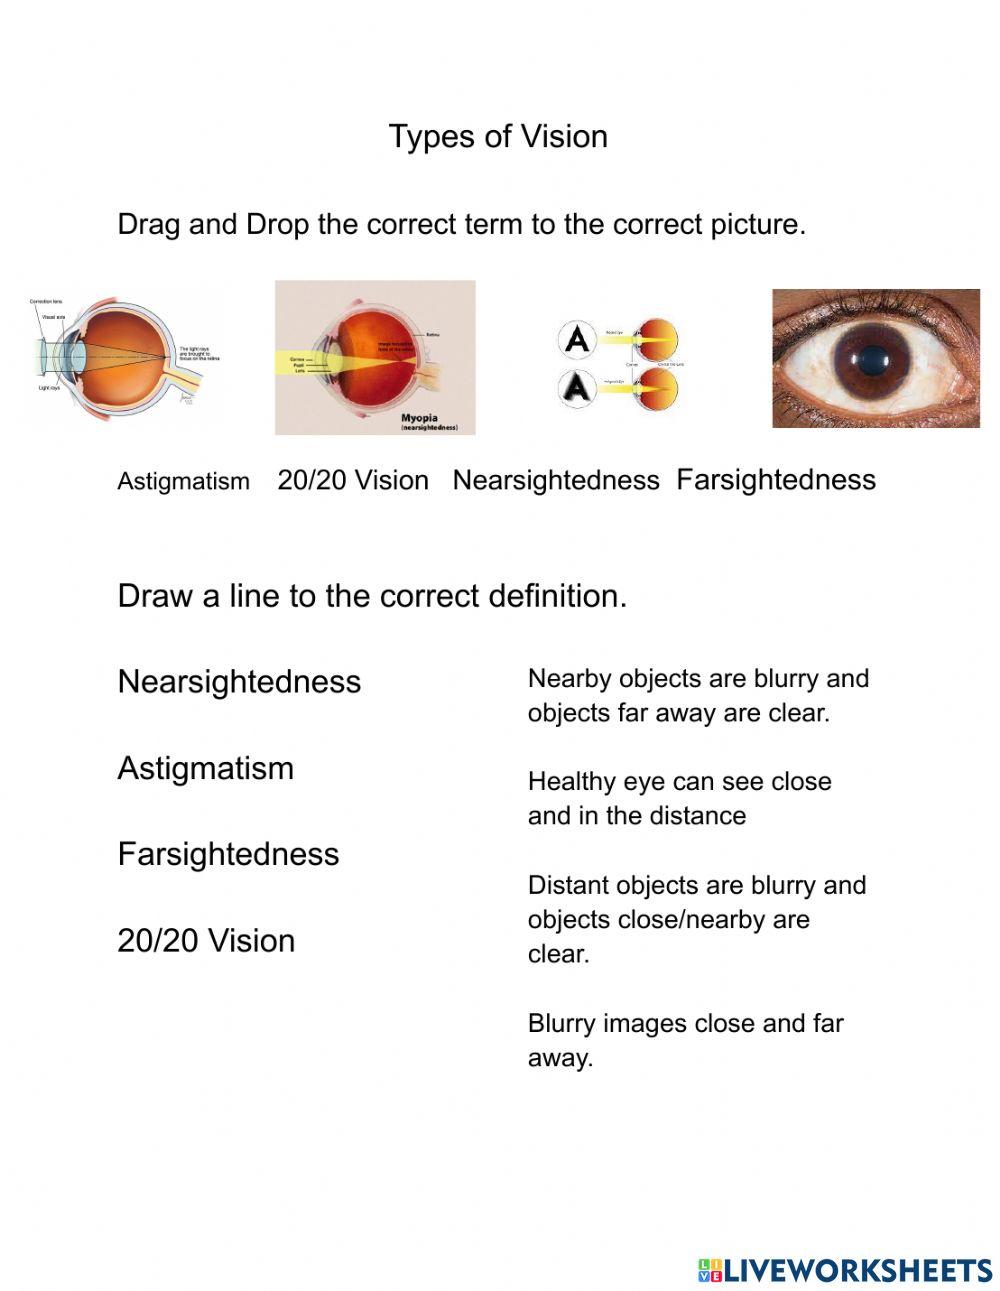 Types of Vision